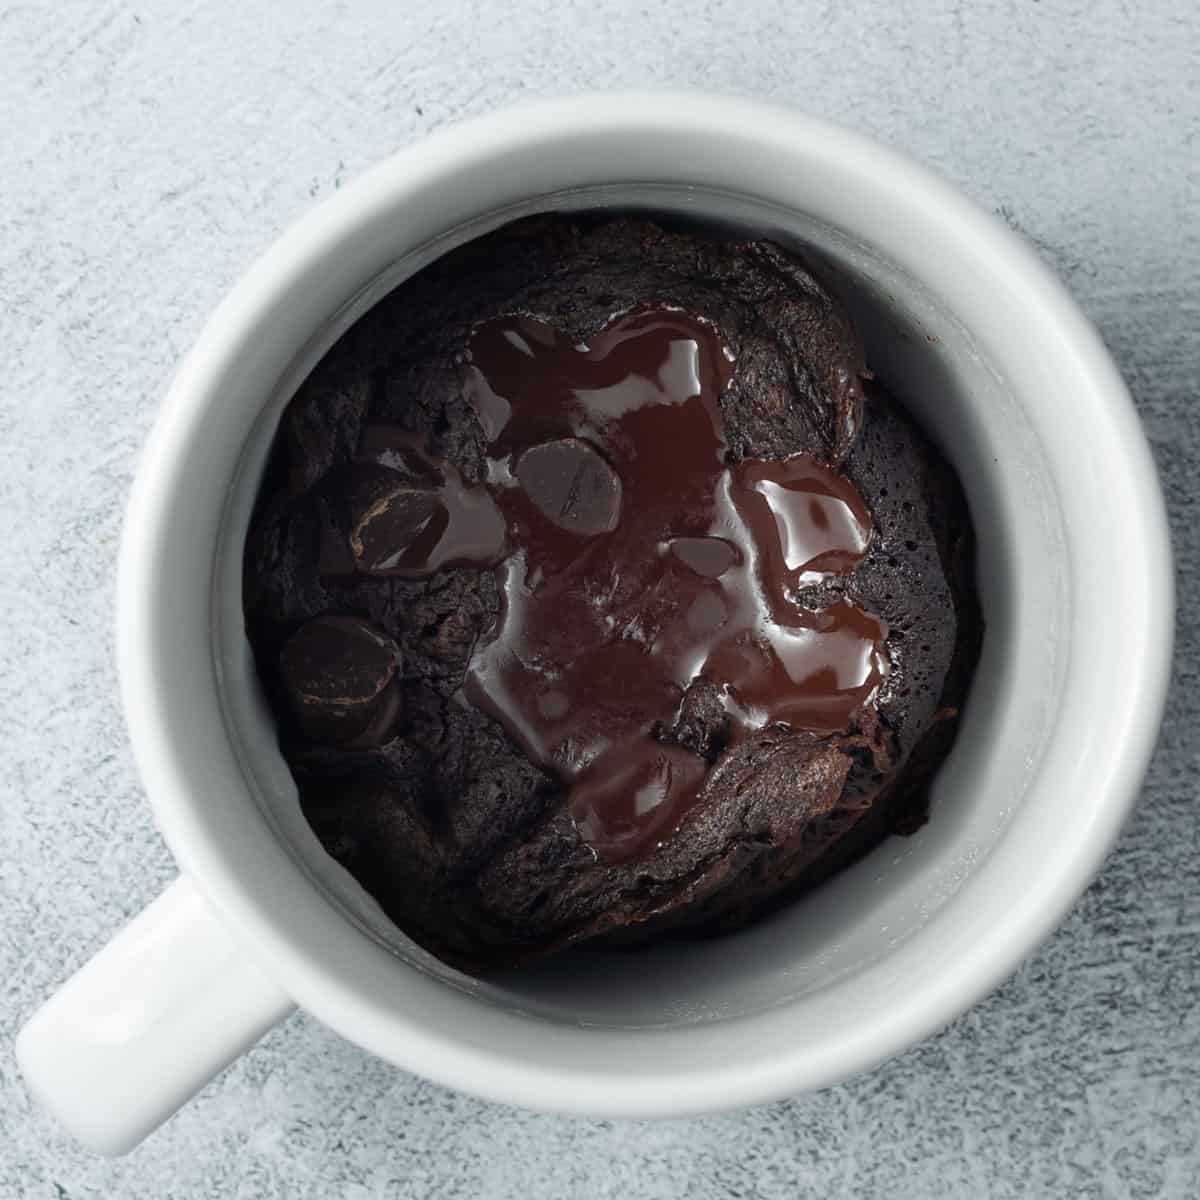 Top-down view of a chocolate protein powder mug cake with chocolate chips in a white mug.